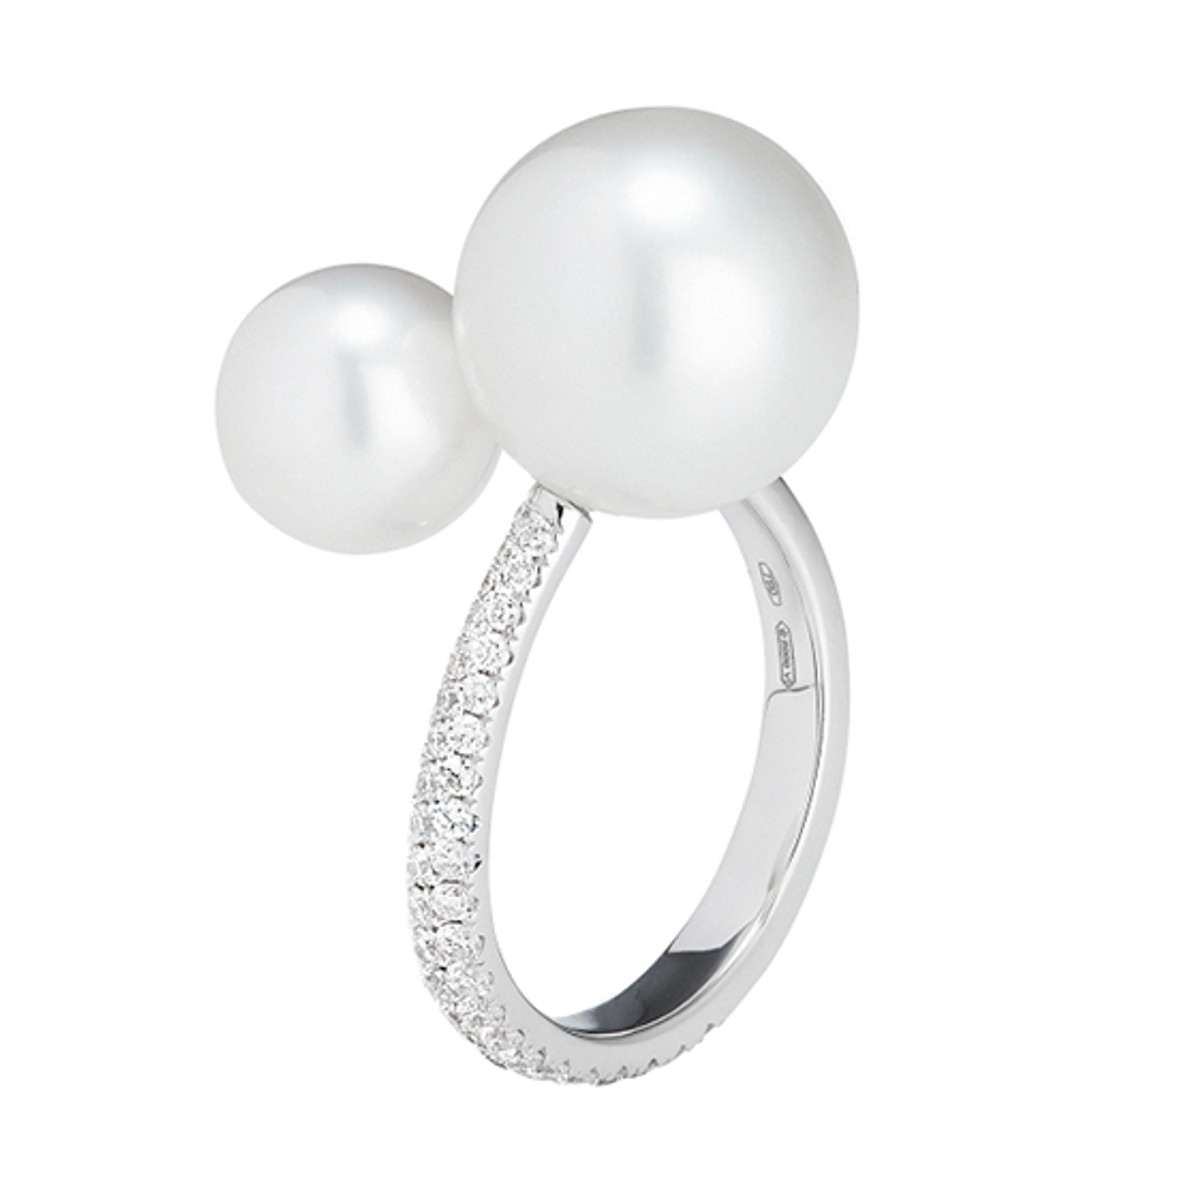 Alessandra Dona 18K White Gold, Pearl & Diamond Crossover Ring Product Image